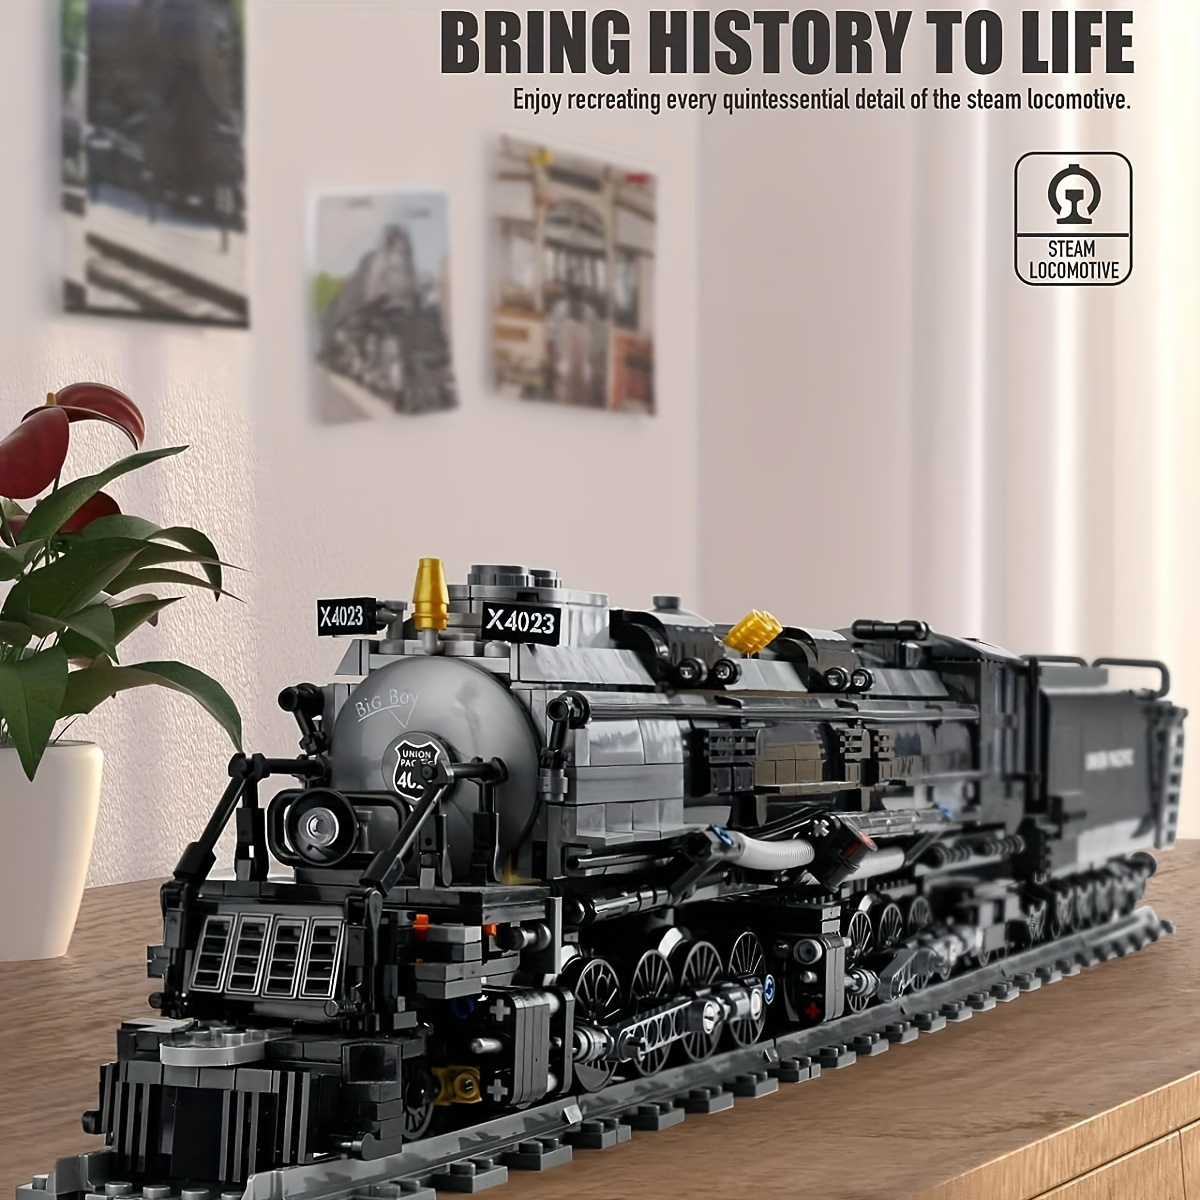 

Probrixx 1608pcs Bigboy Steam Train Construction Kit, Building Block Set, Collectible Steam Locomotive Display Kit, Large Train Kit With Train Tracks, Top Of The Line Gift For Train Enthusiasts